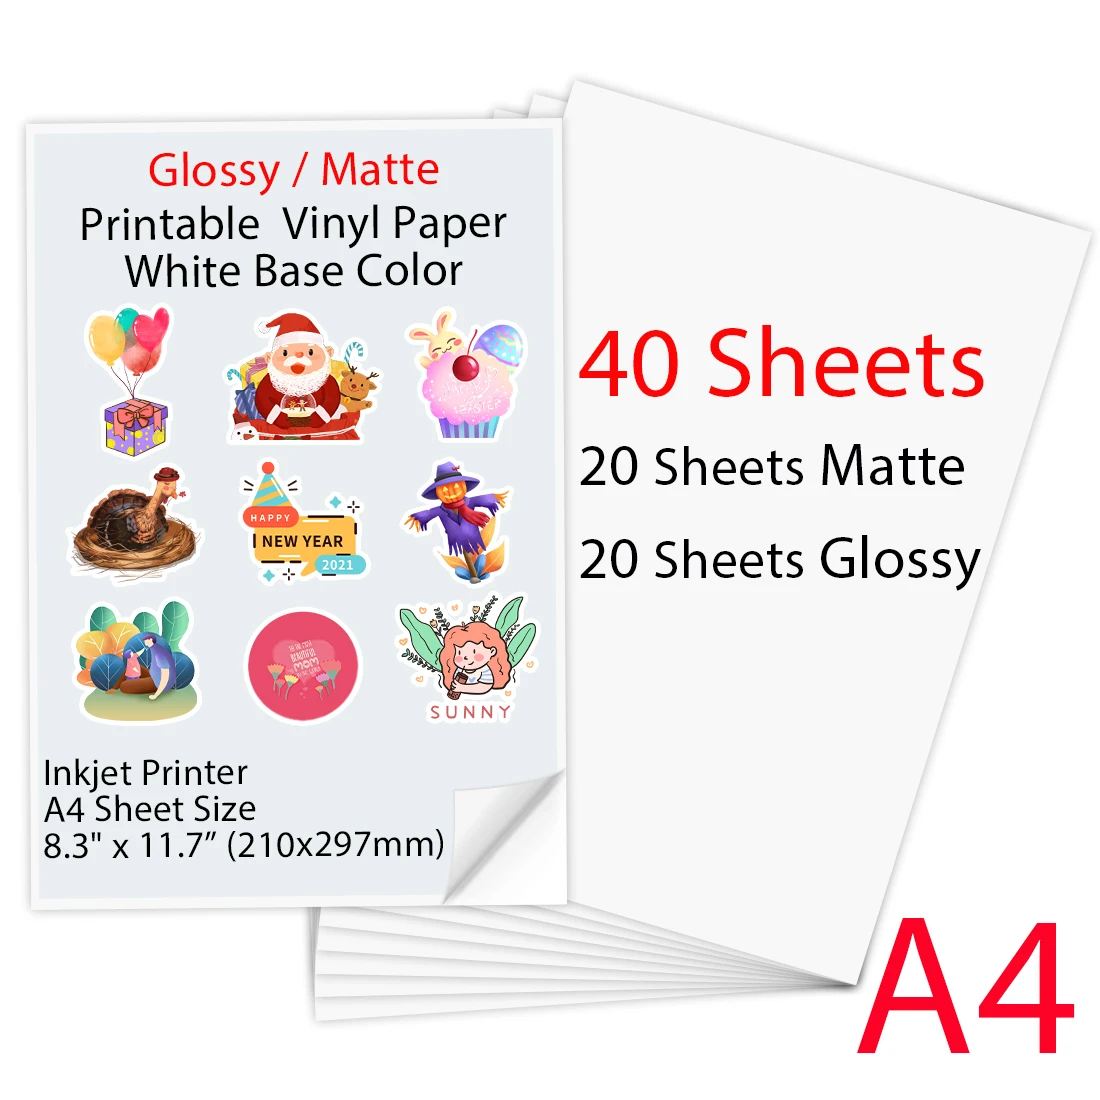 

40 Sheets A4 Printable Vinyl Sticker Paper 210*297mm Glossy Matte Printing Copy Paper A4 Size White Paper for All Inkjet printer